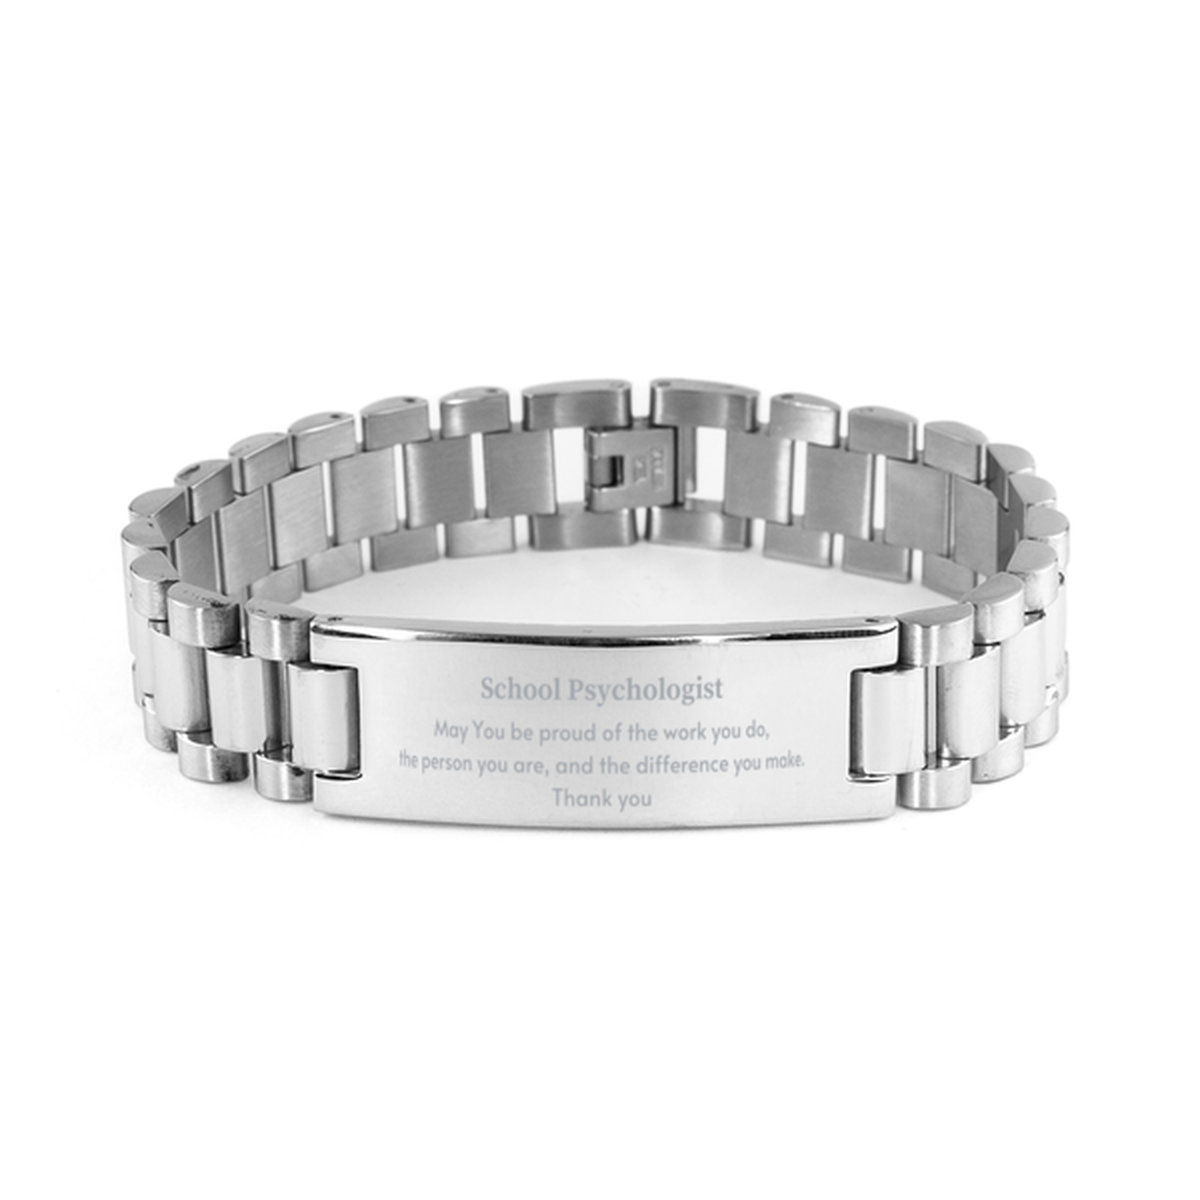 Heartwarming Ladder Stainless Steel Bracelet Retirement Coworkers Gifts for School Psychologist, School Psychologist May You be proud of the work you do, the person you are Gifts for Boss Men Women Friends